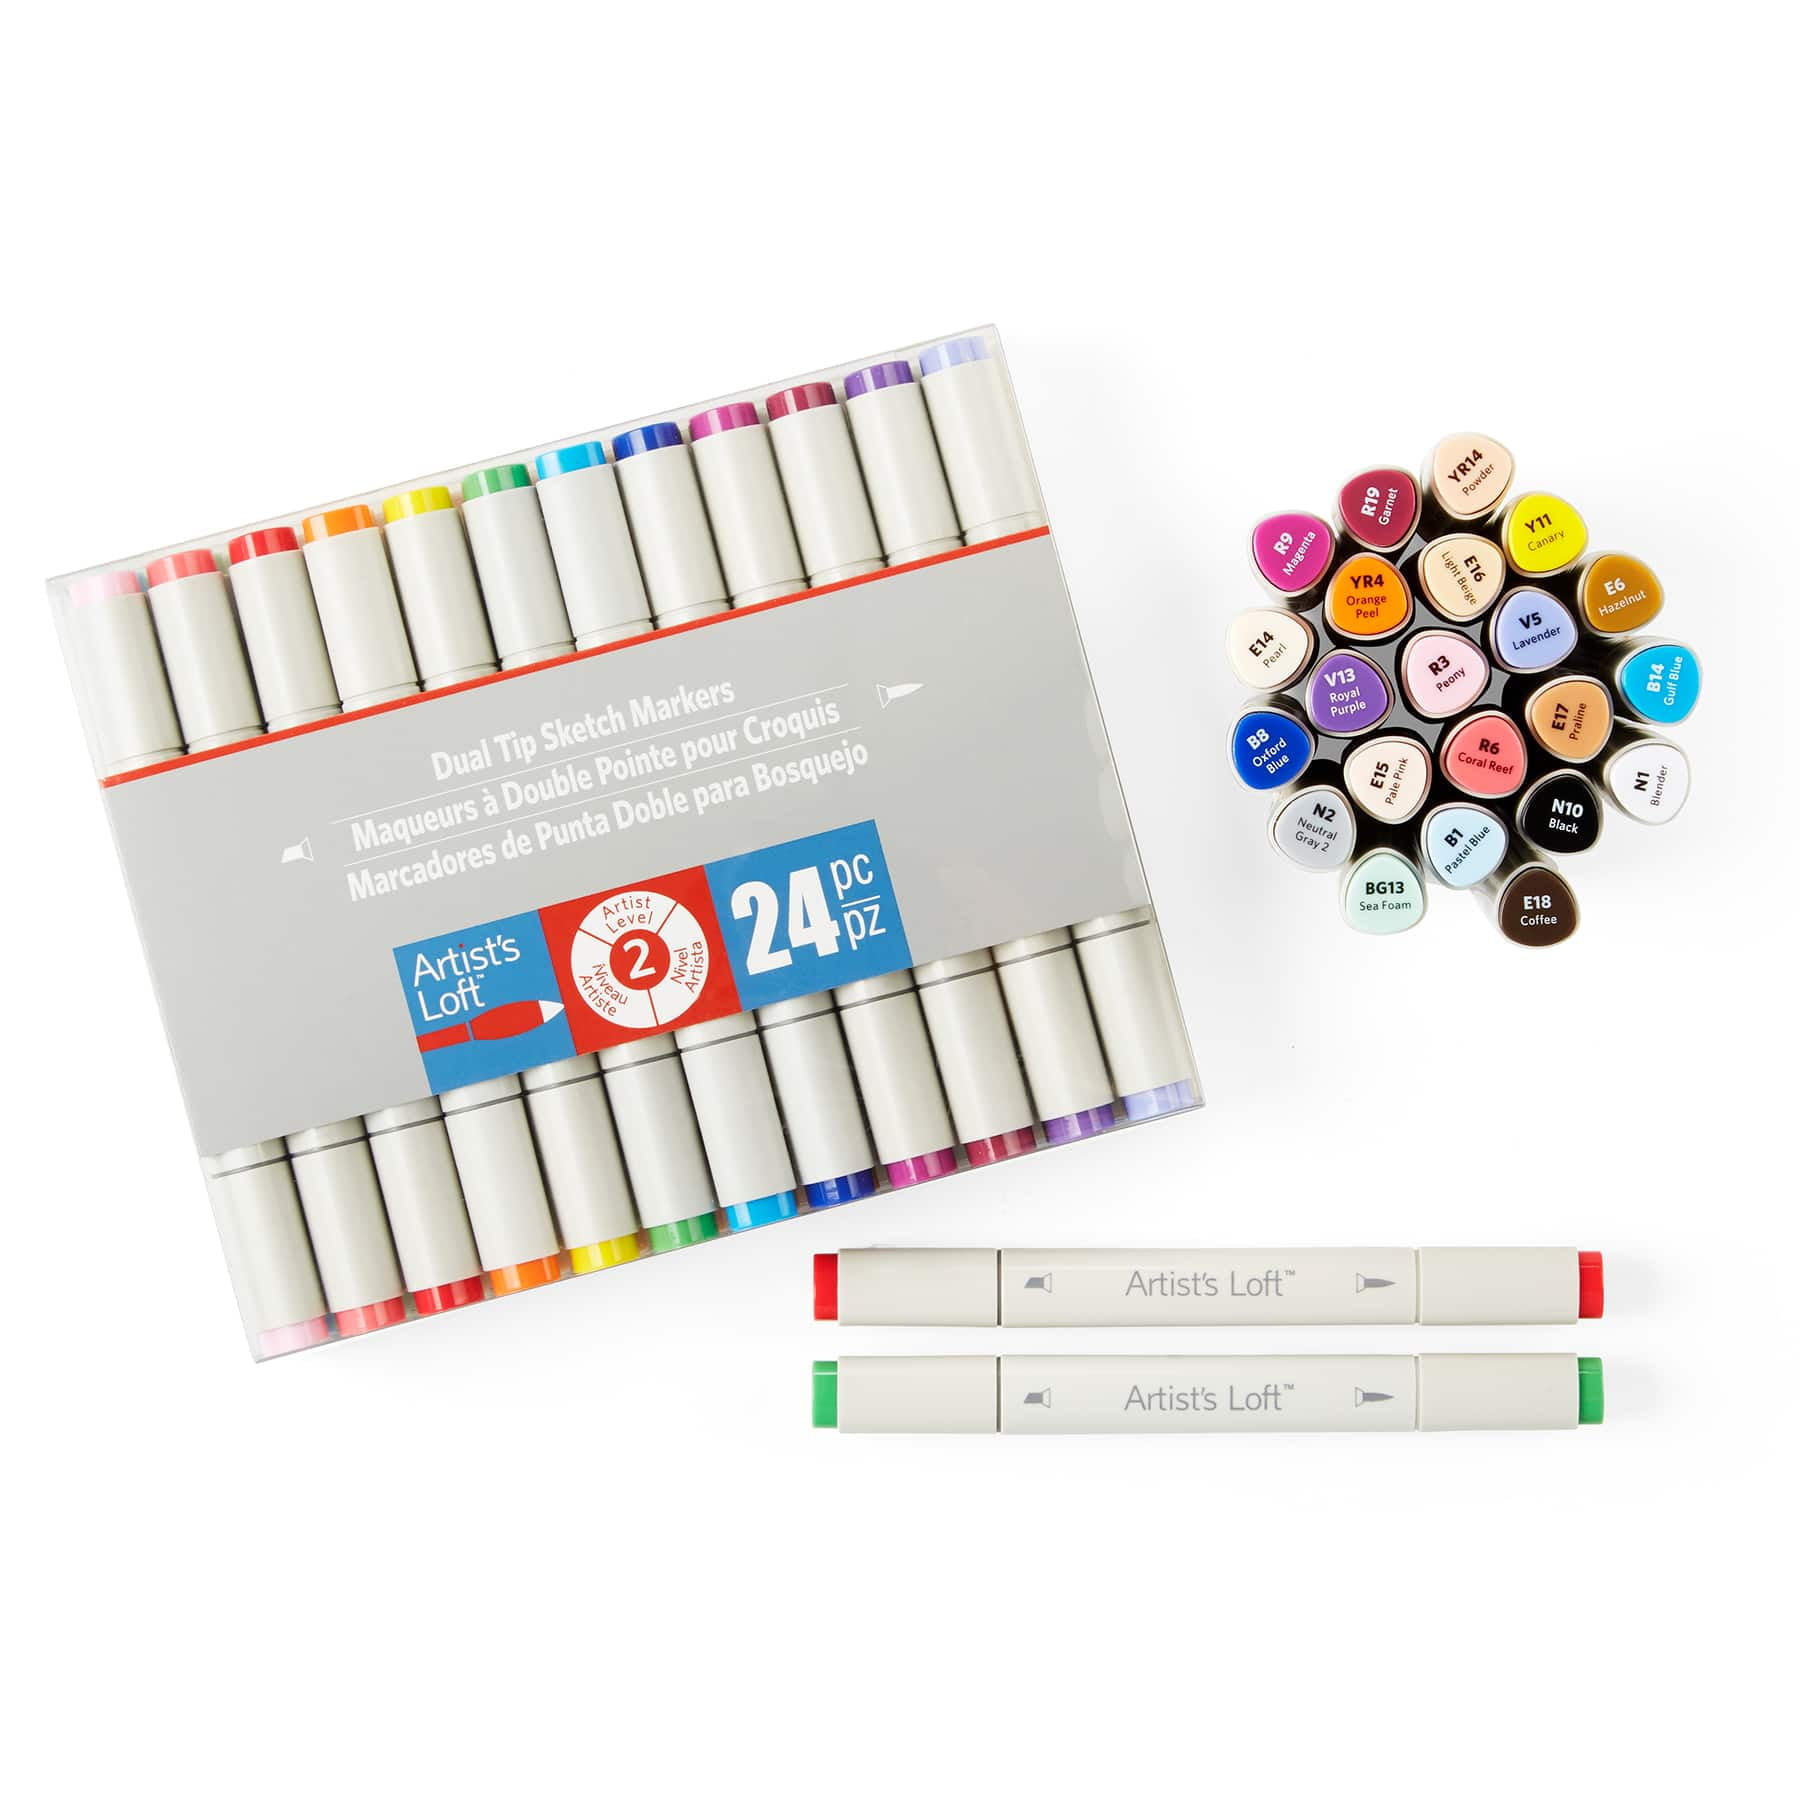 24 Packs: 2 Ct. (48 Total) Fine Tip Permanent Markers by Artist's Loft, Silver